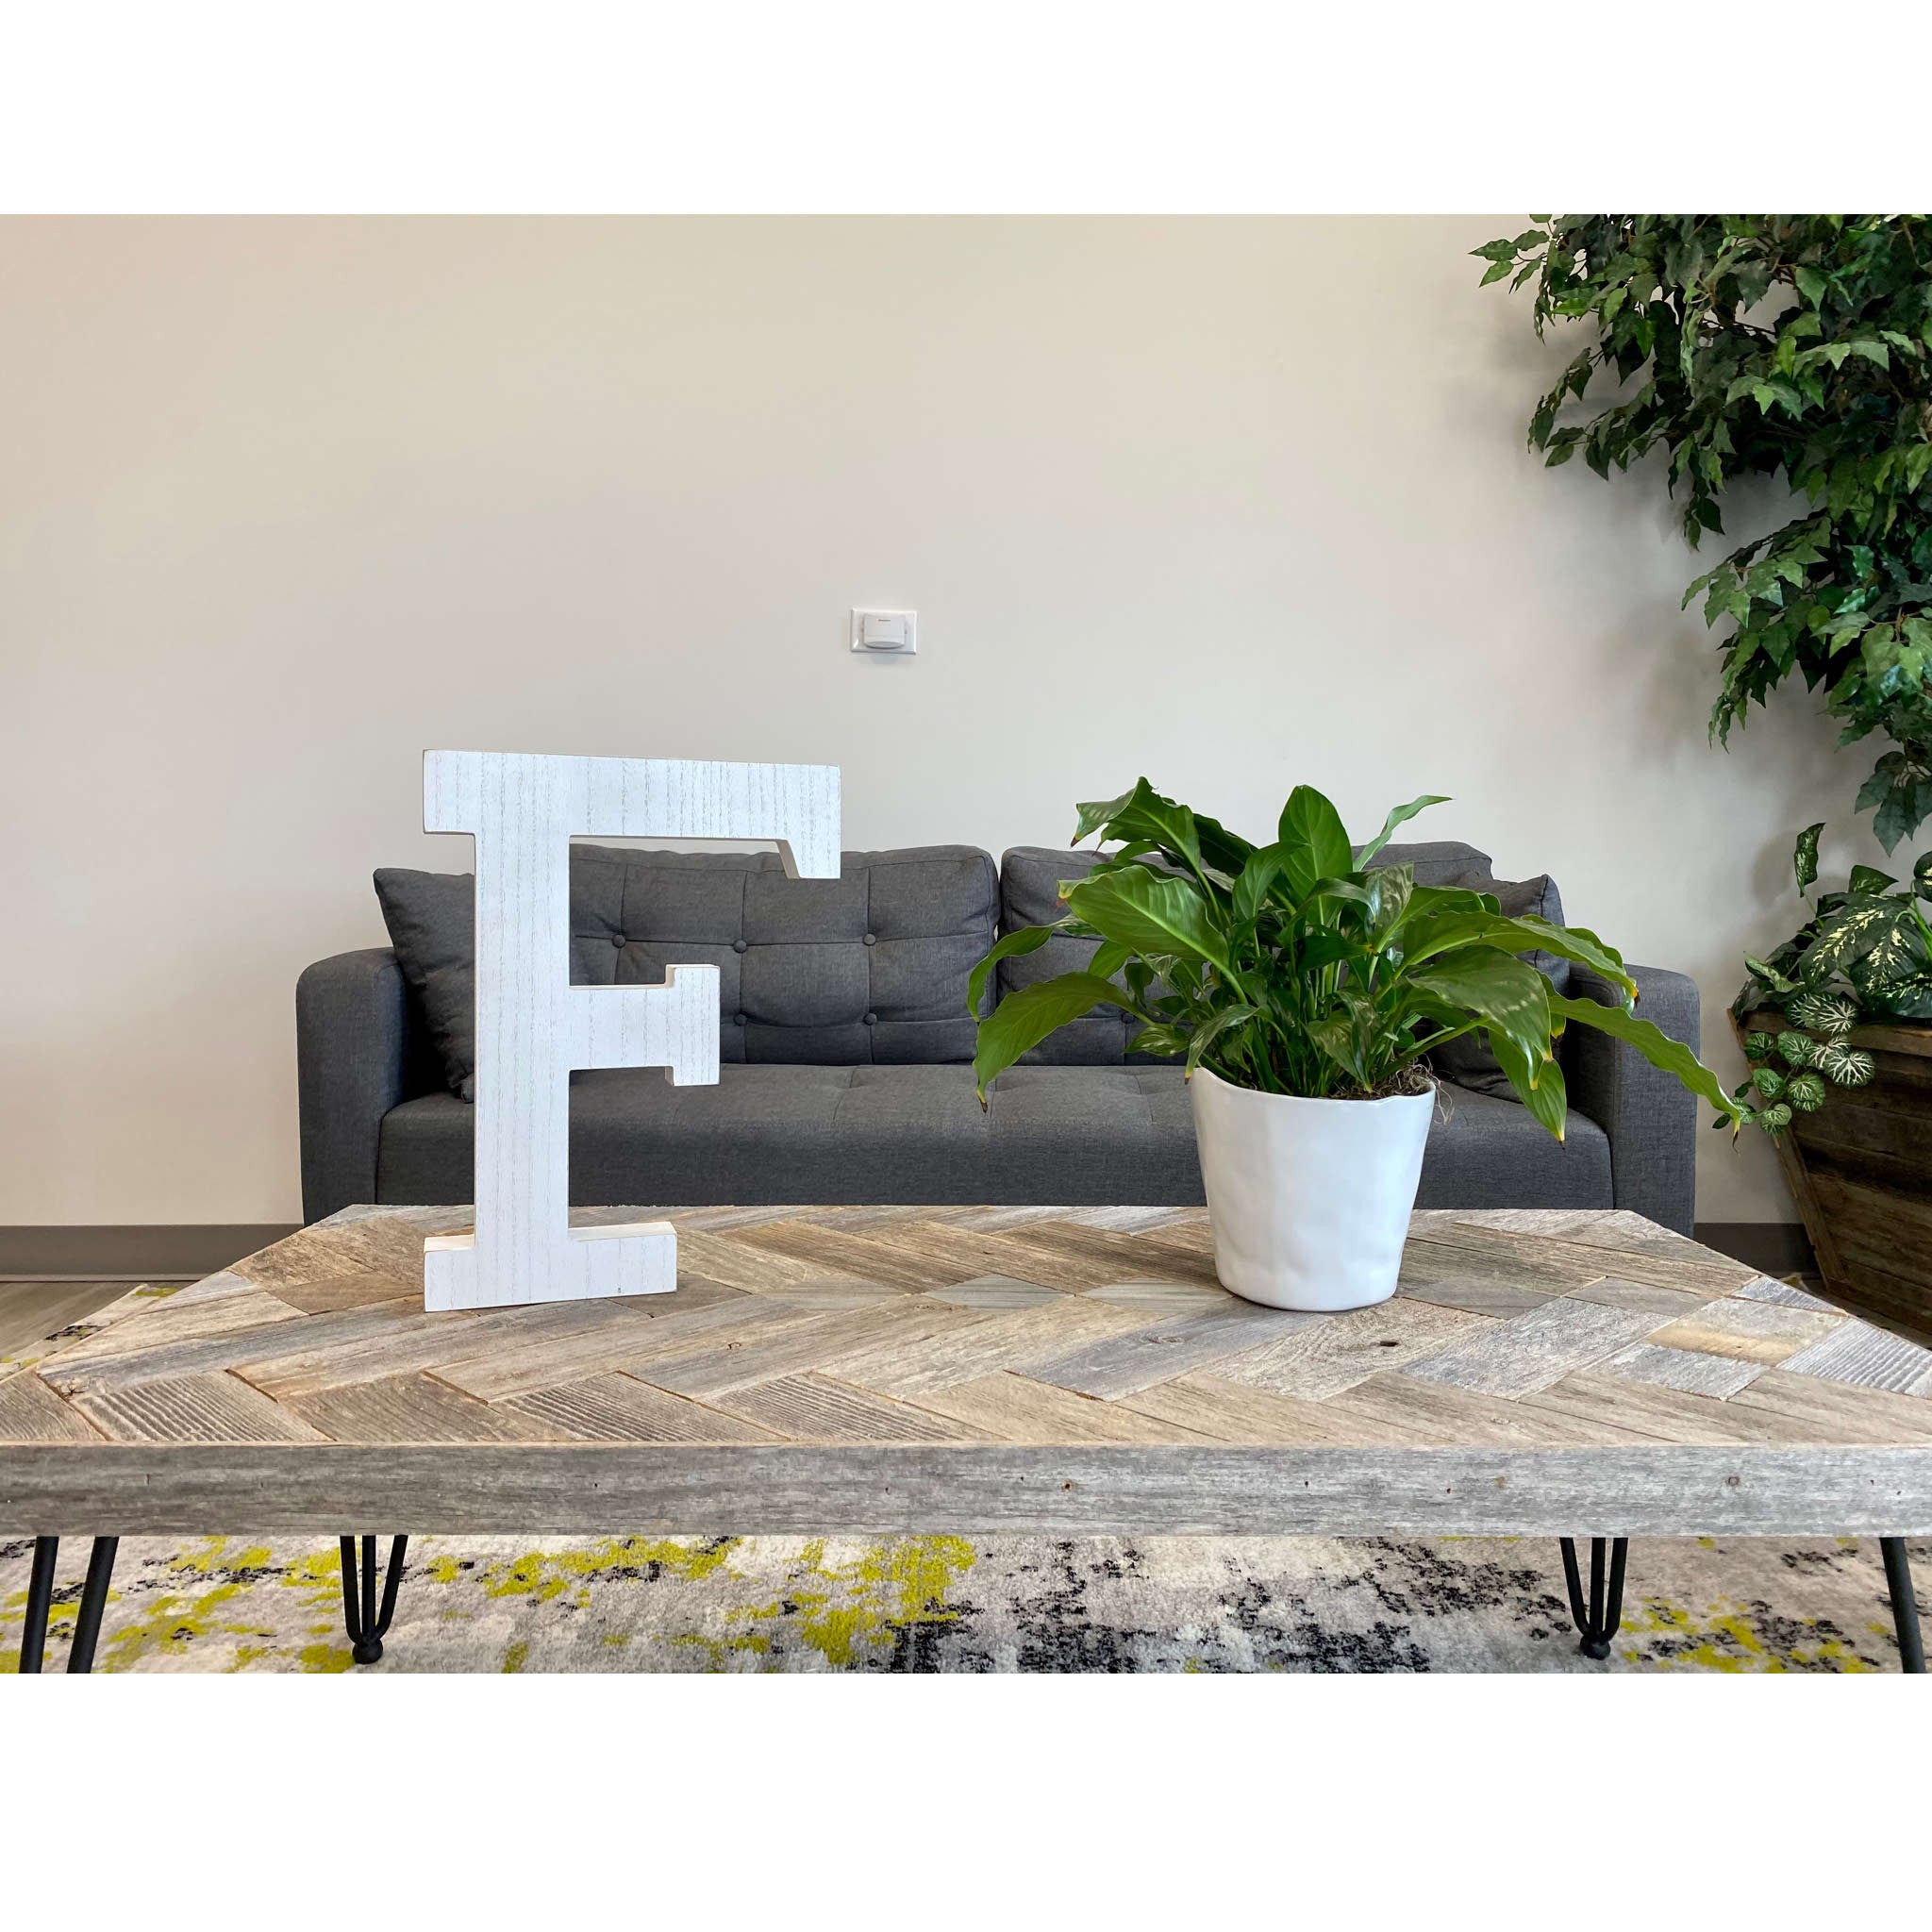 16" Distressed White Wash Wooden Initial Letter F Sculpture